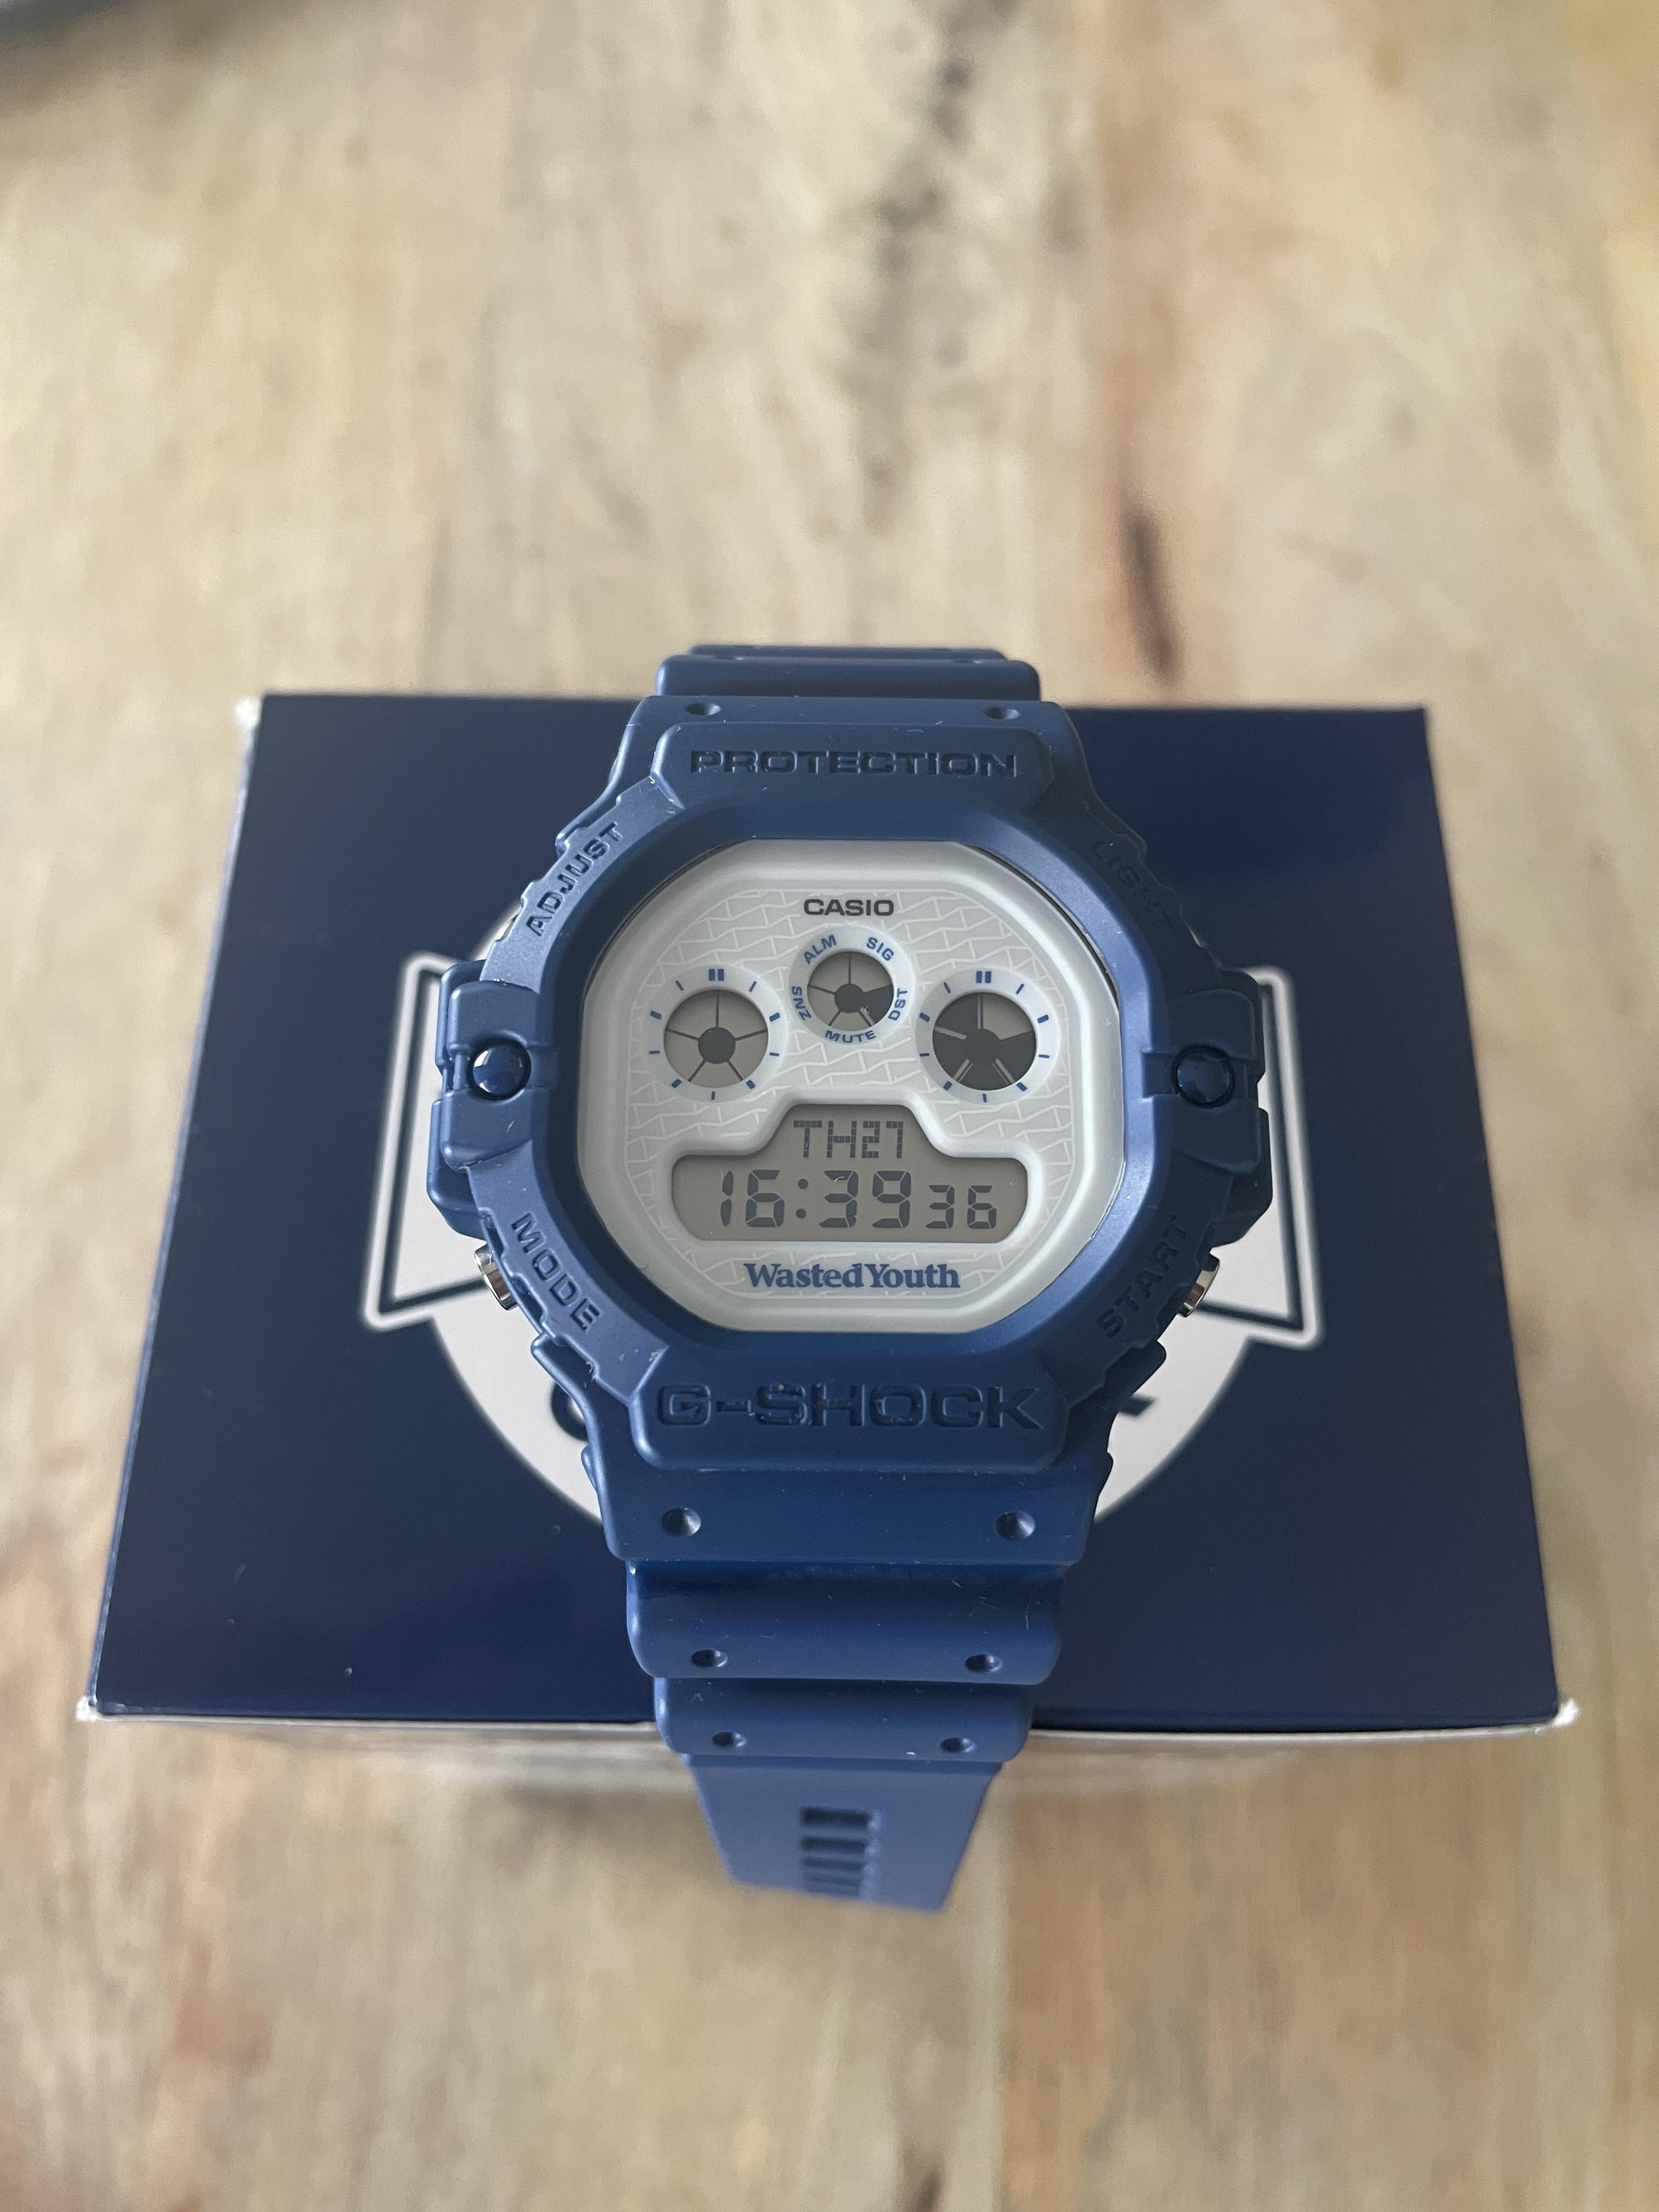 WTS] Casio x Wasted Youth G-Shock DW-5900WY-2ER | WatchCharts